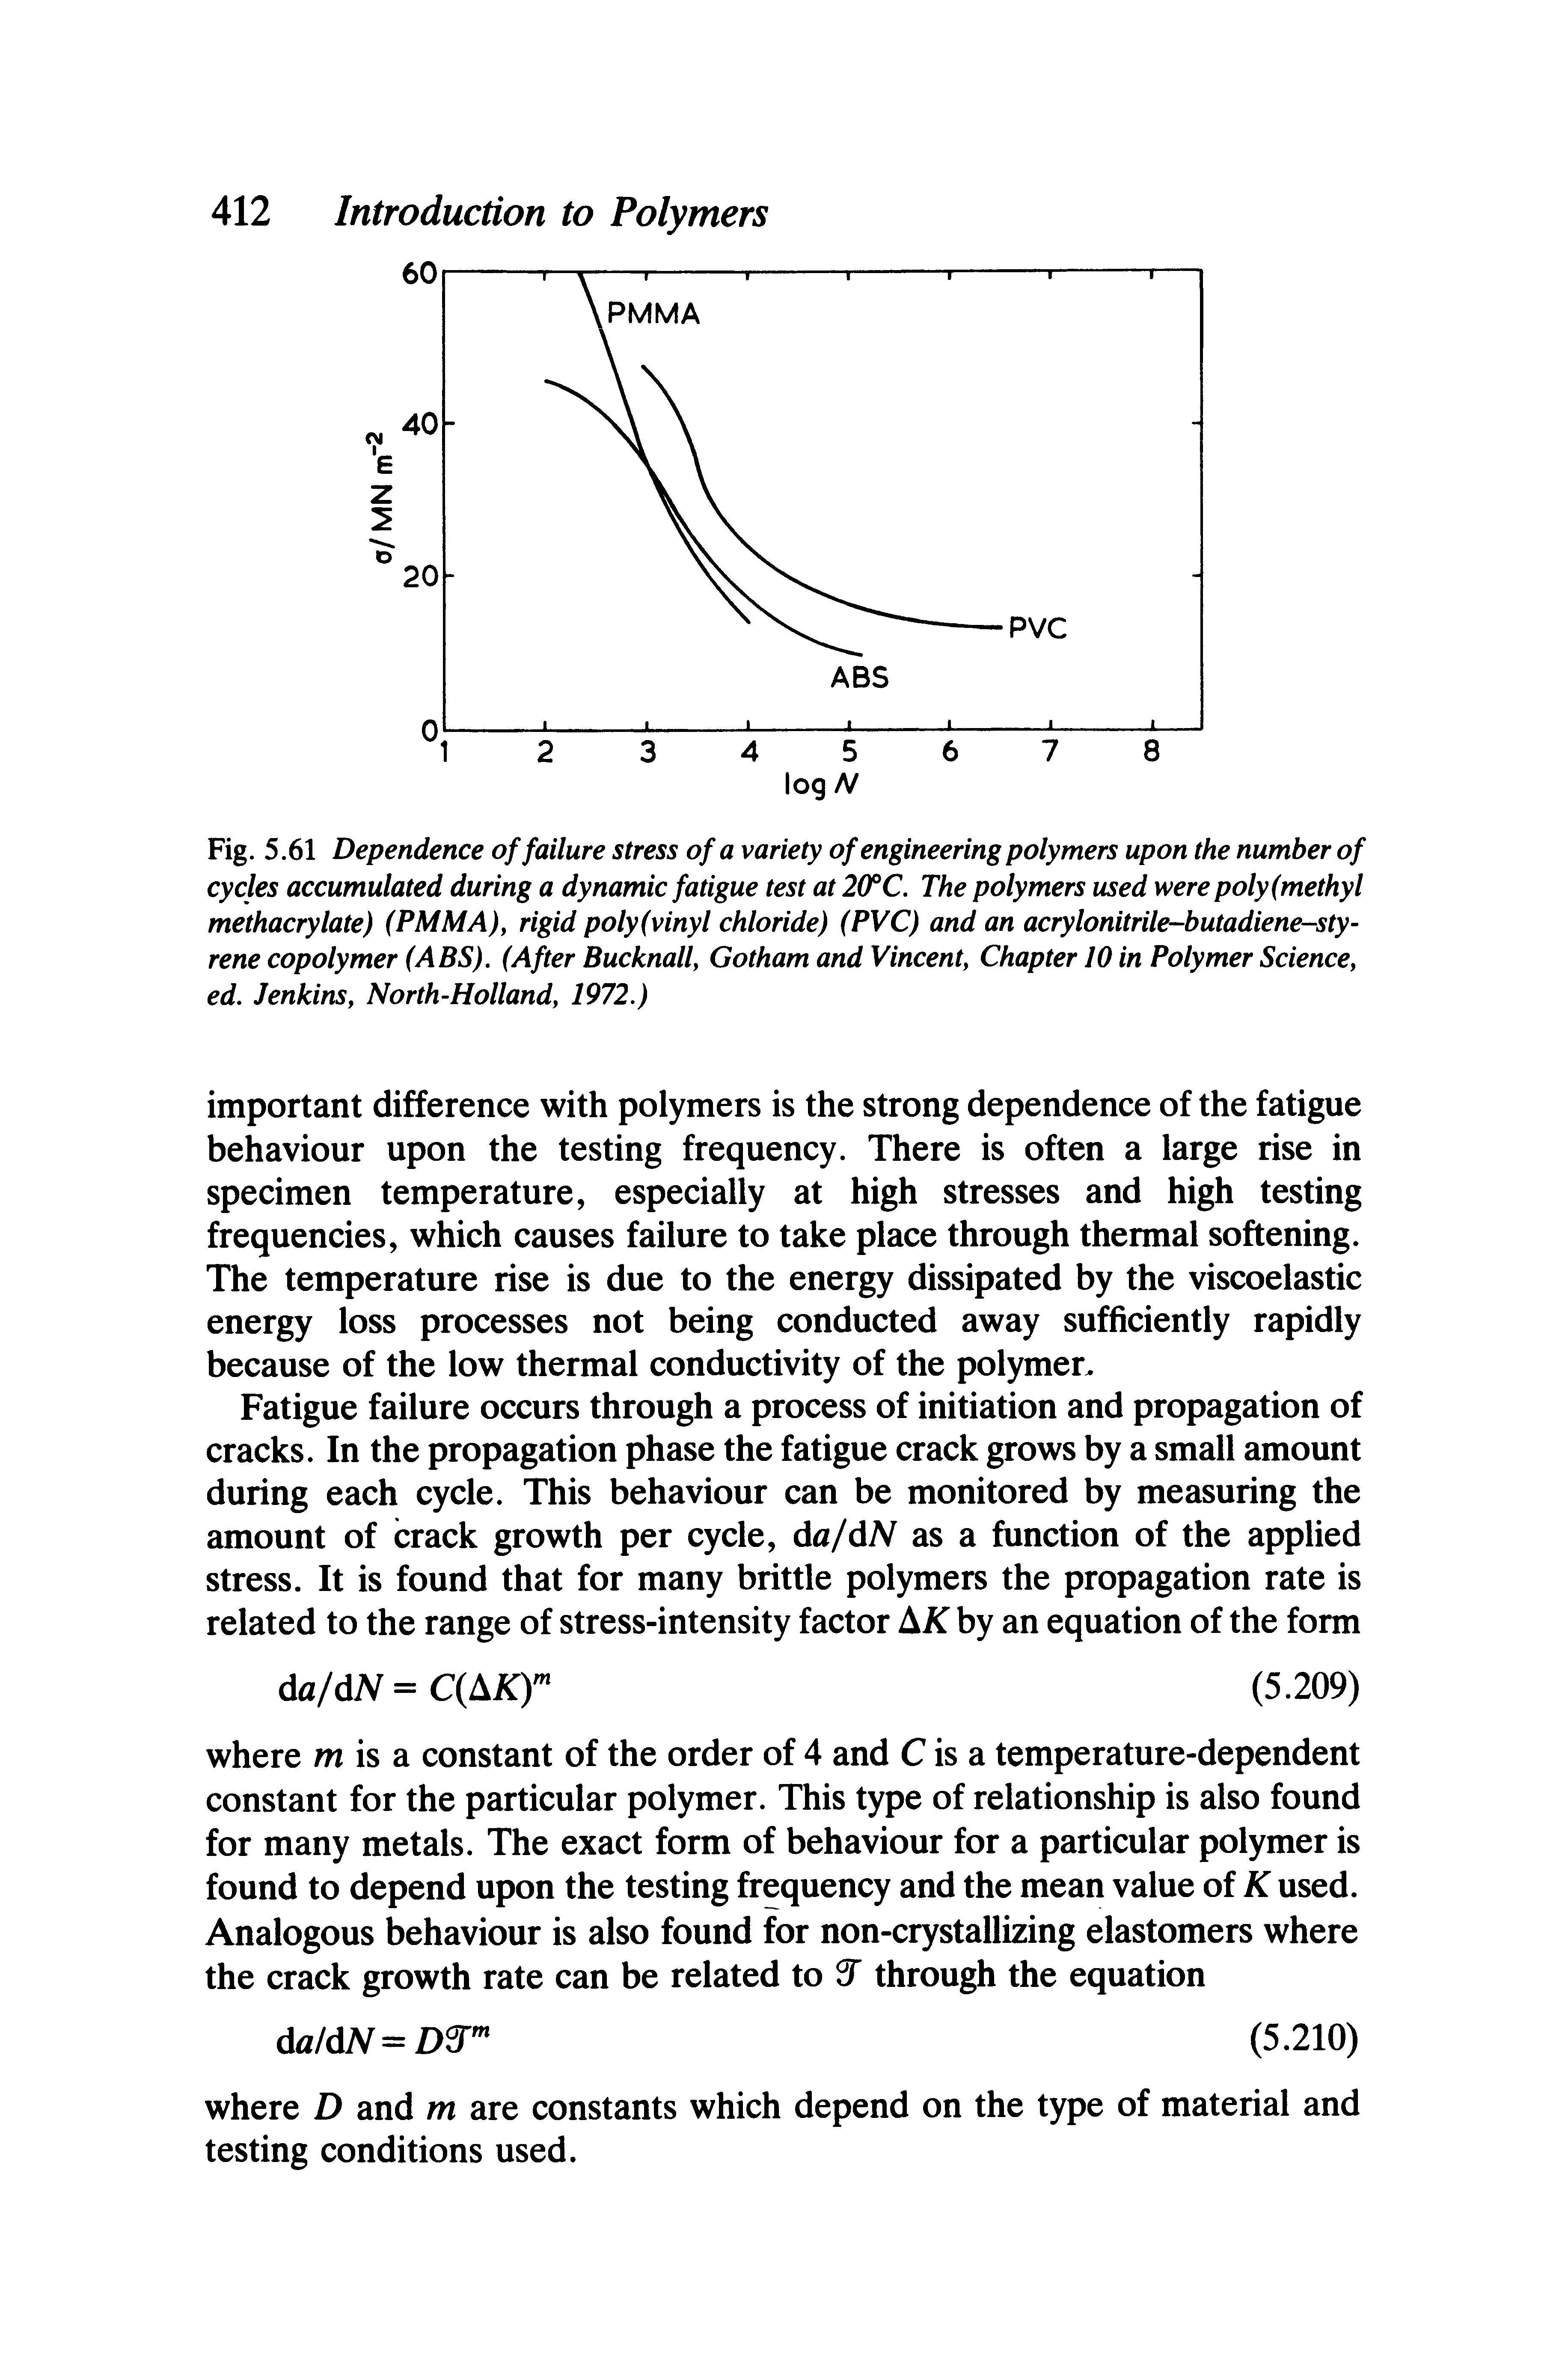 Fig. 5.61 Dependence of failure stress of a variety of engineering polymers upon the number of cycles accumulated during a dynamic fatigue test at 2(fC. The polymers used were poly (methyl methacrylate) (PMMA), rigid poly (vinyl chloride) (PVC) and an acrylonitrile-butadiene-styrene copolymer (ABS). (After Bucknall, Gotham and Vincent Chapter 10 in Polymer Sciencey ed. Jenkinsy North-Holland, 1972.)...